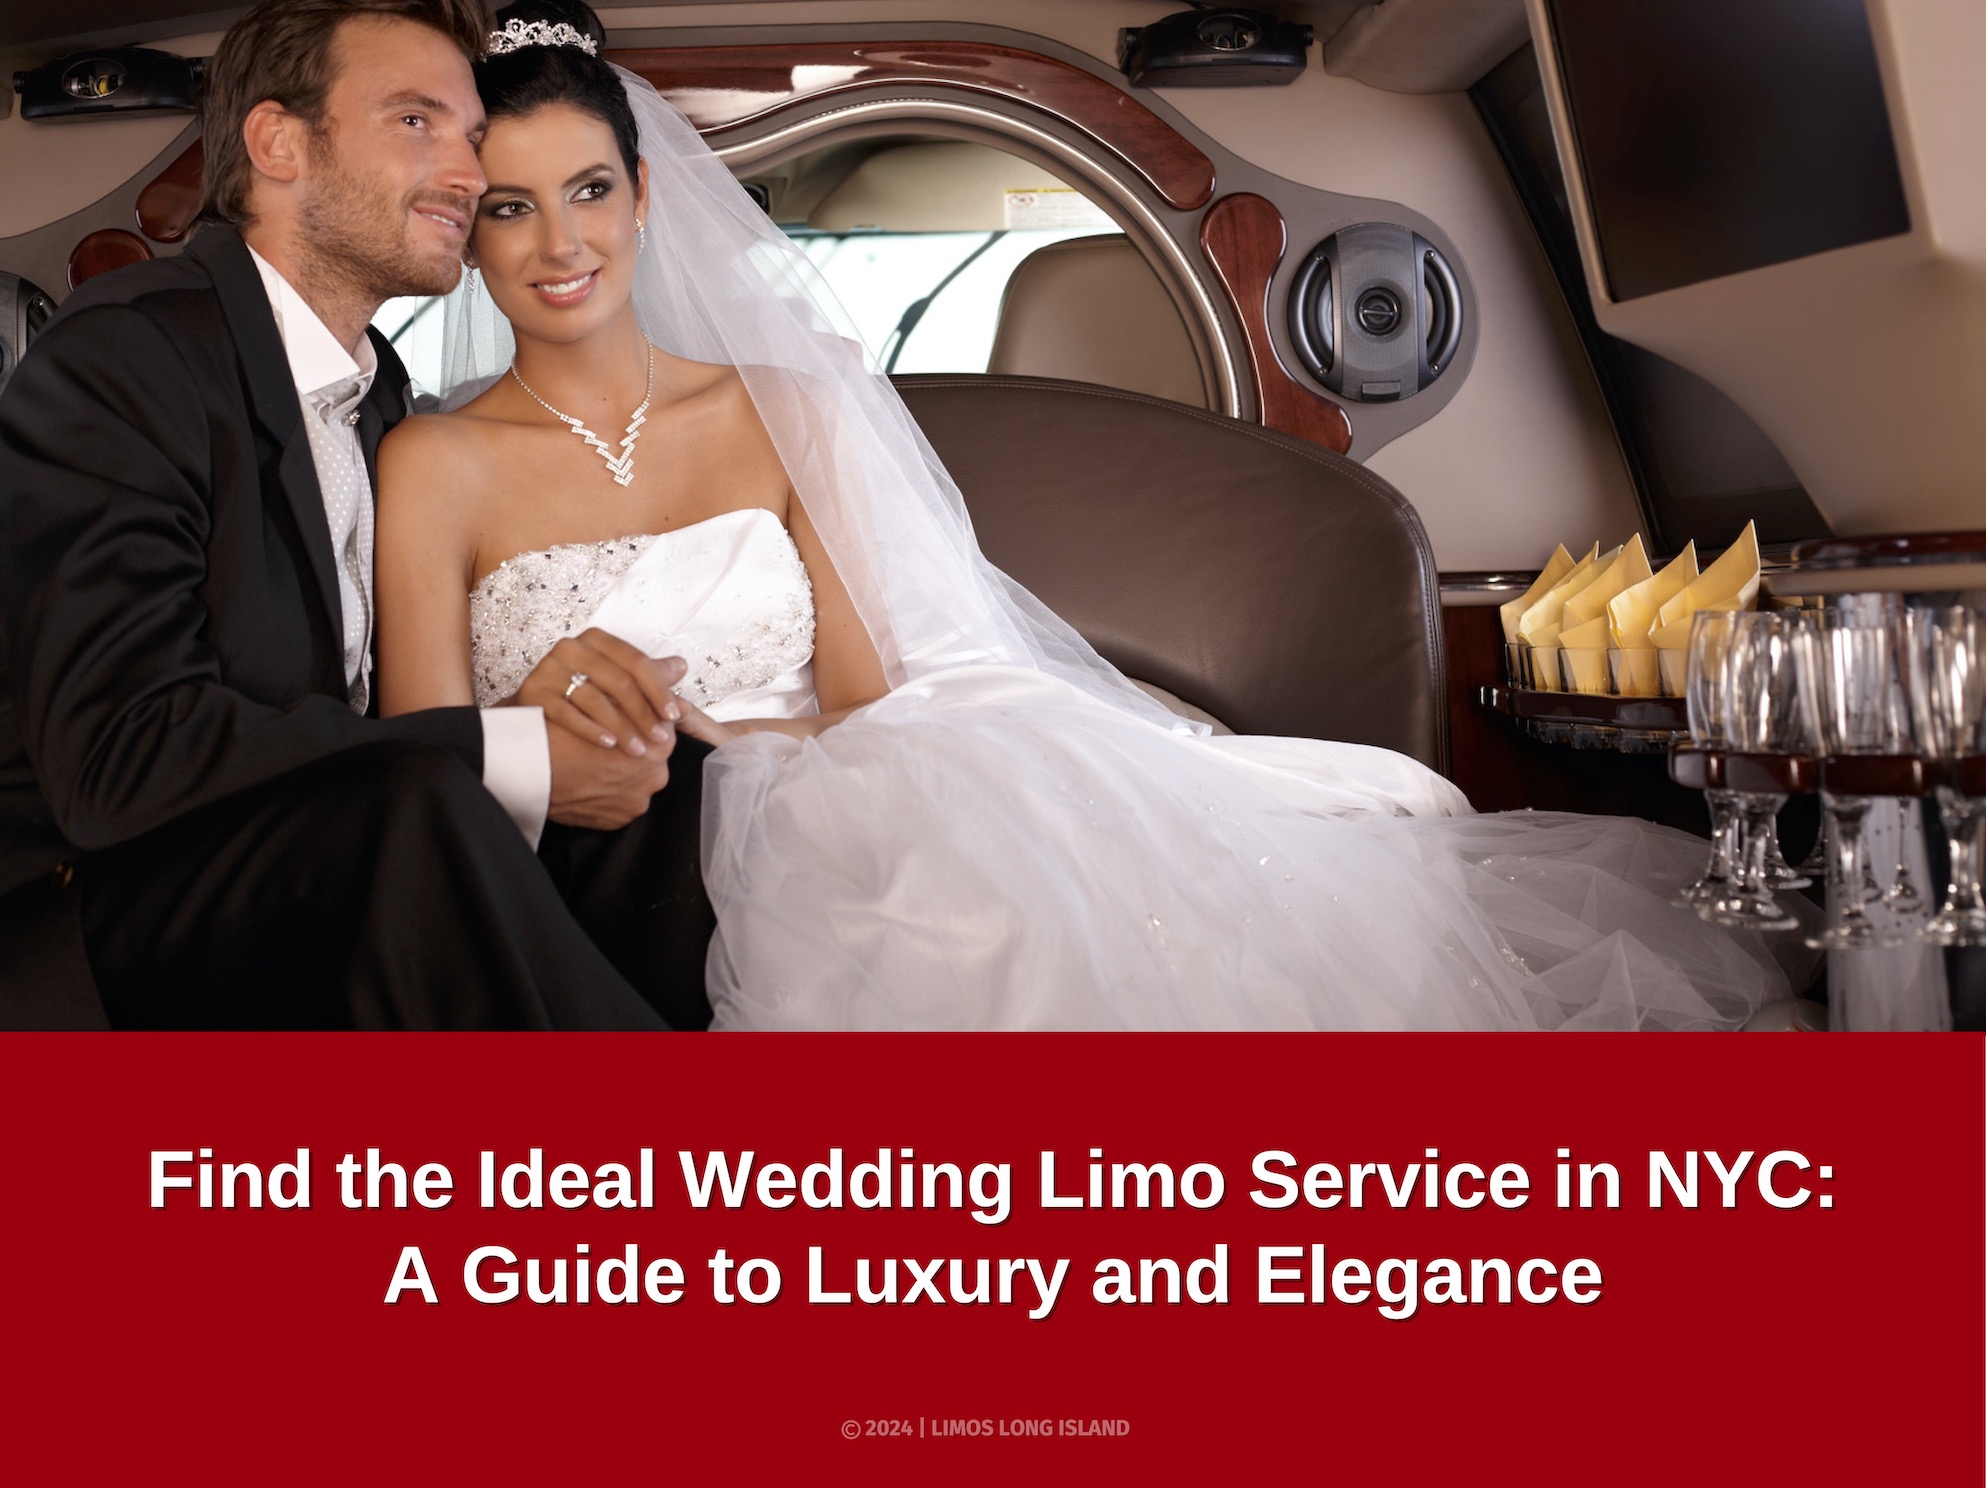 Find the Ideal Wedding Limo Service in NYC: A Guide to Luxury and Elegance